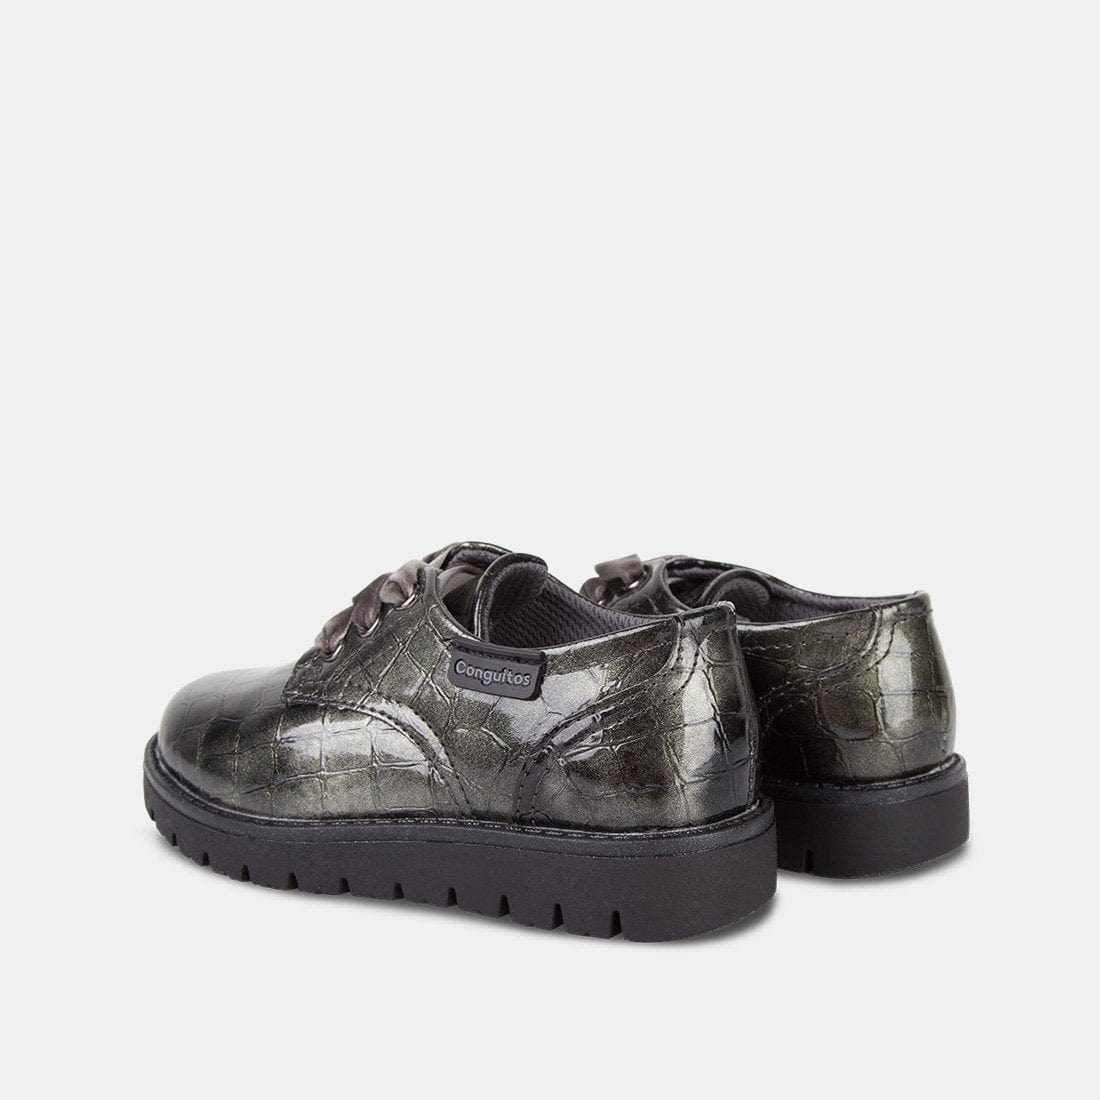 CONGUITOS Shoes Girl's Grey Patent Leather Shoes